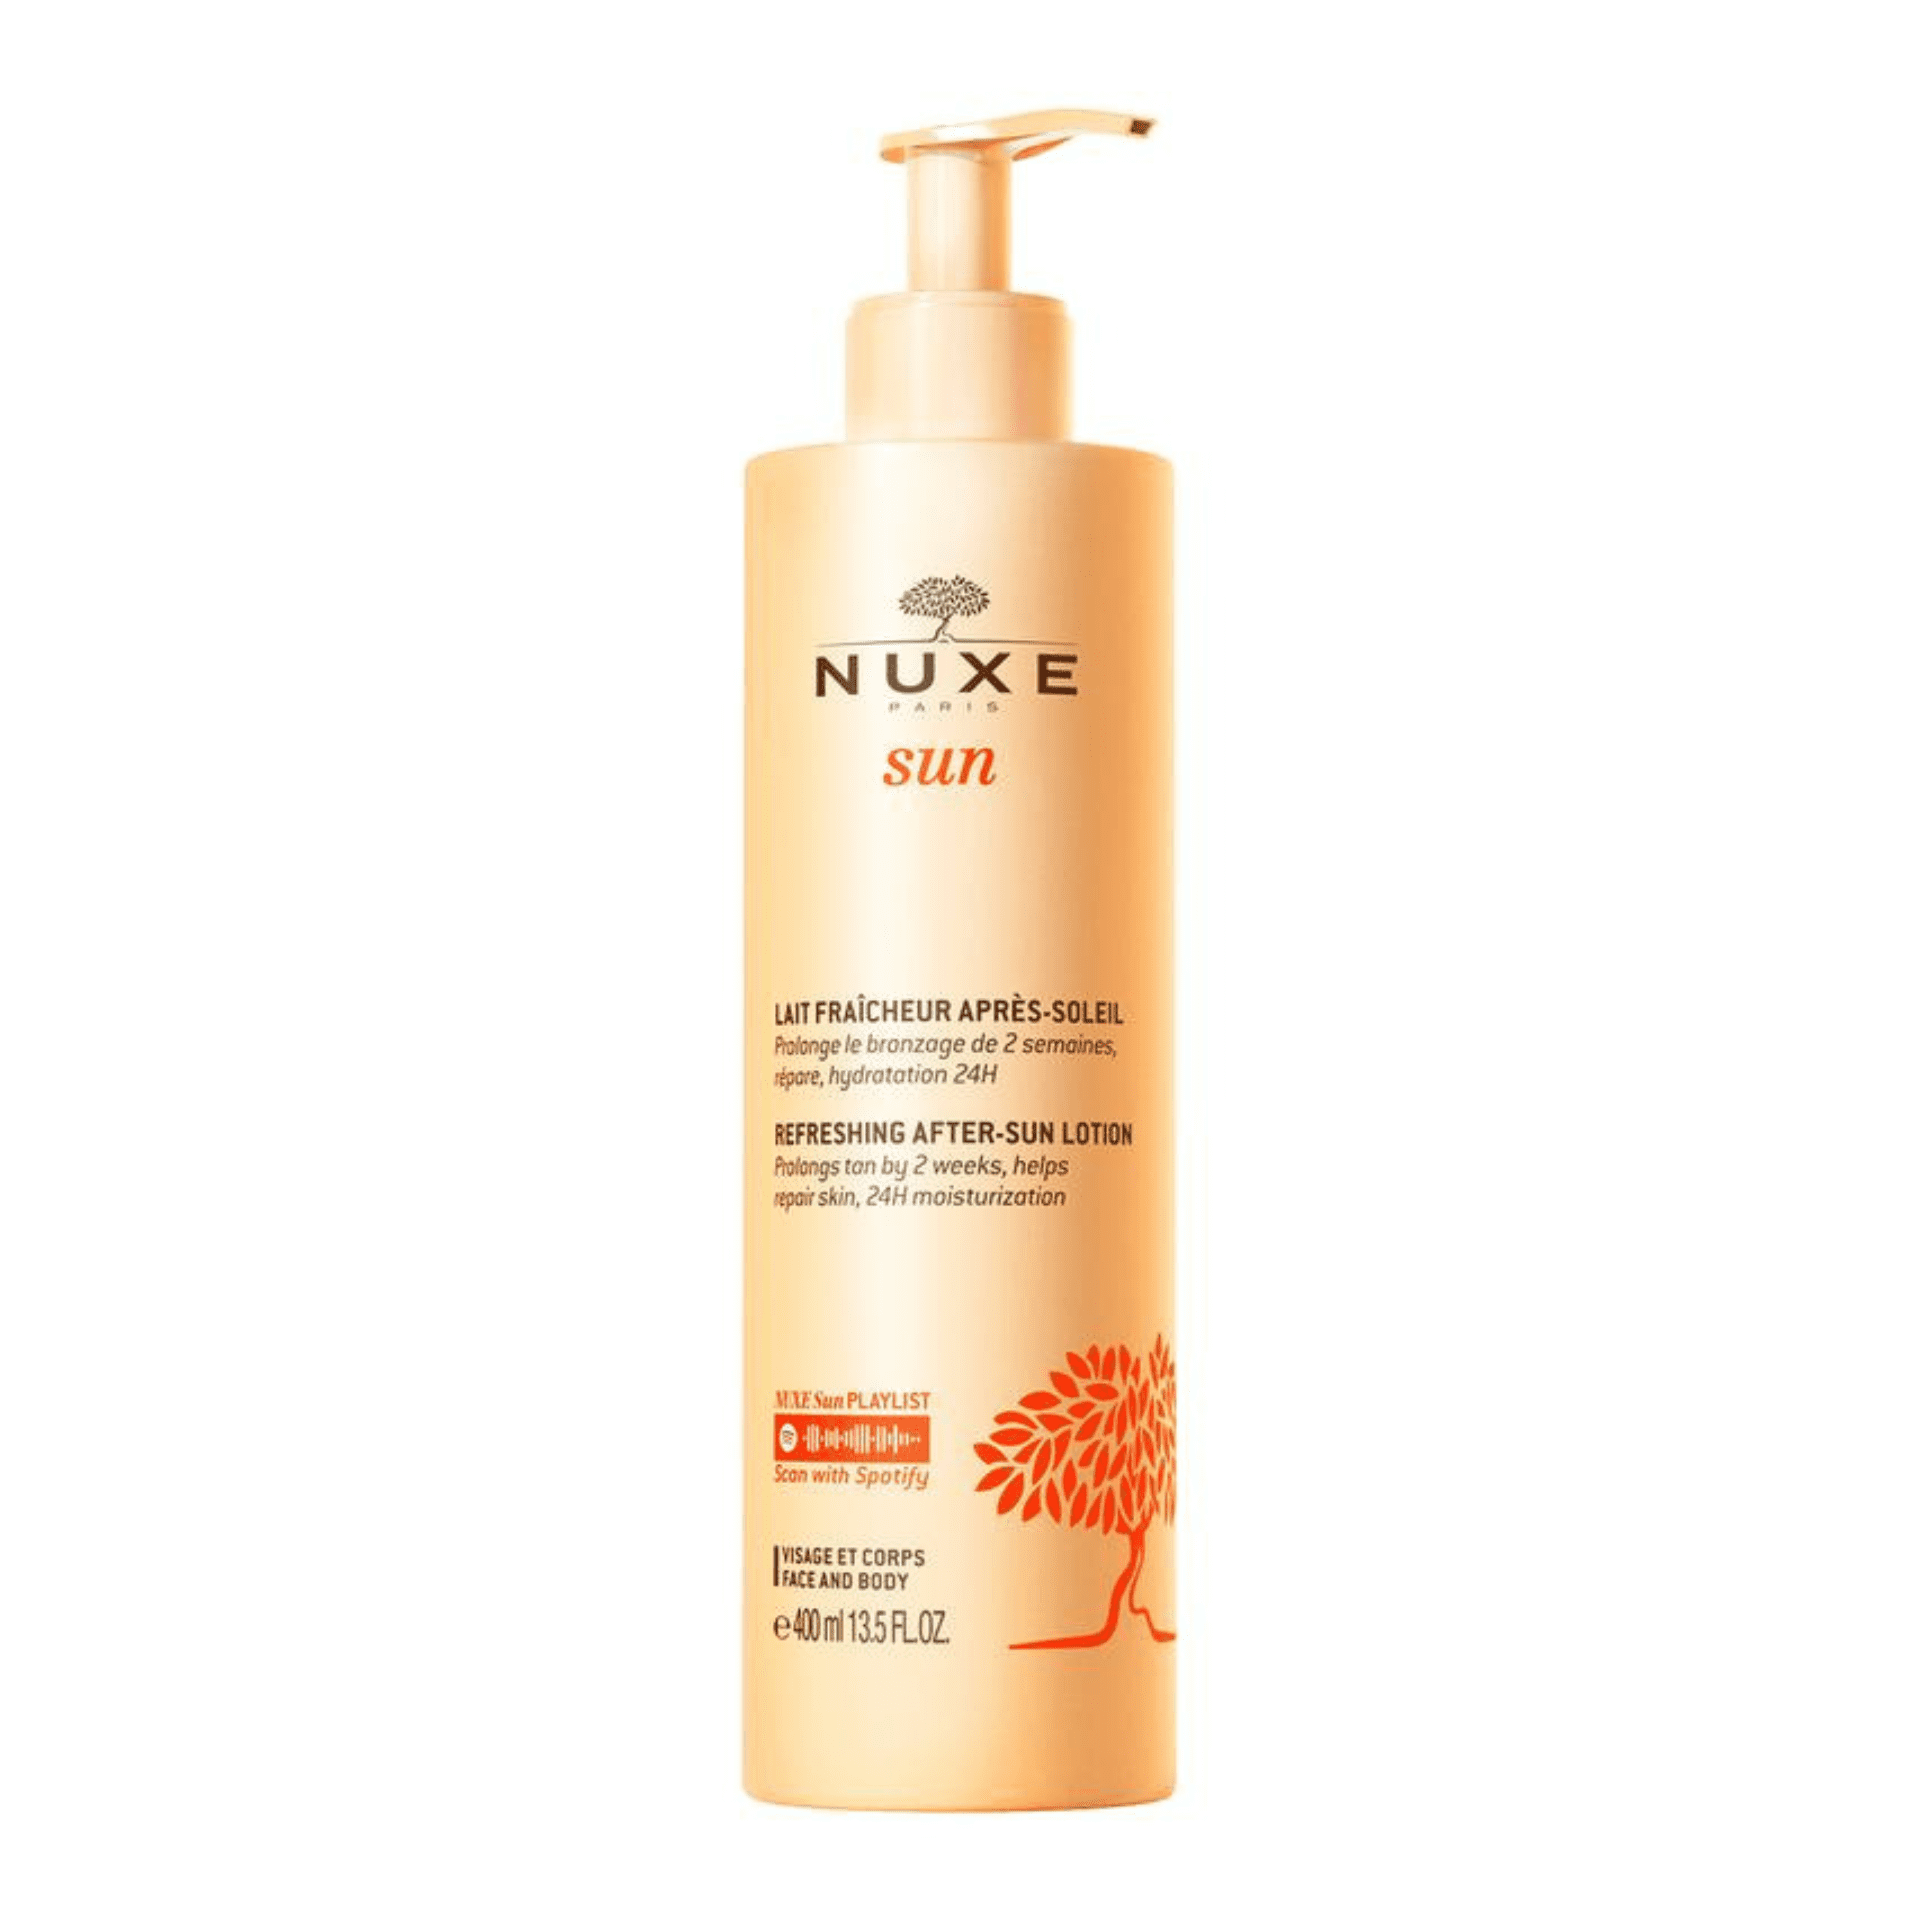 Nuxe Refreshing After Sun Lotion Face & Body